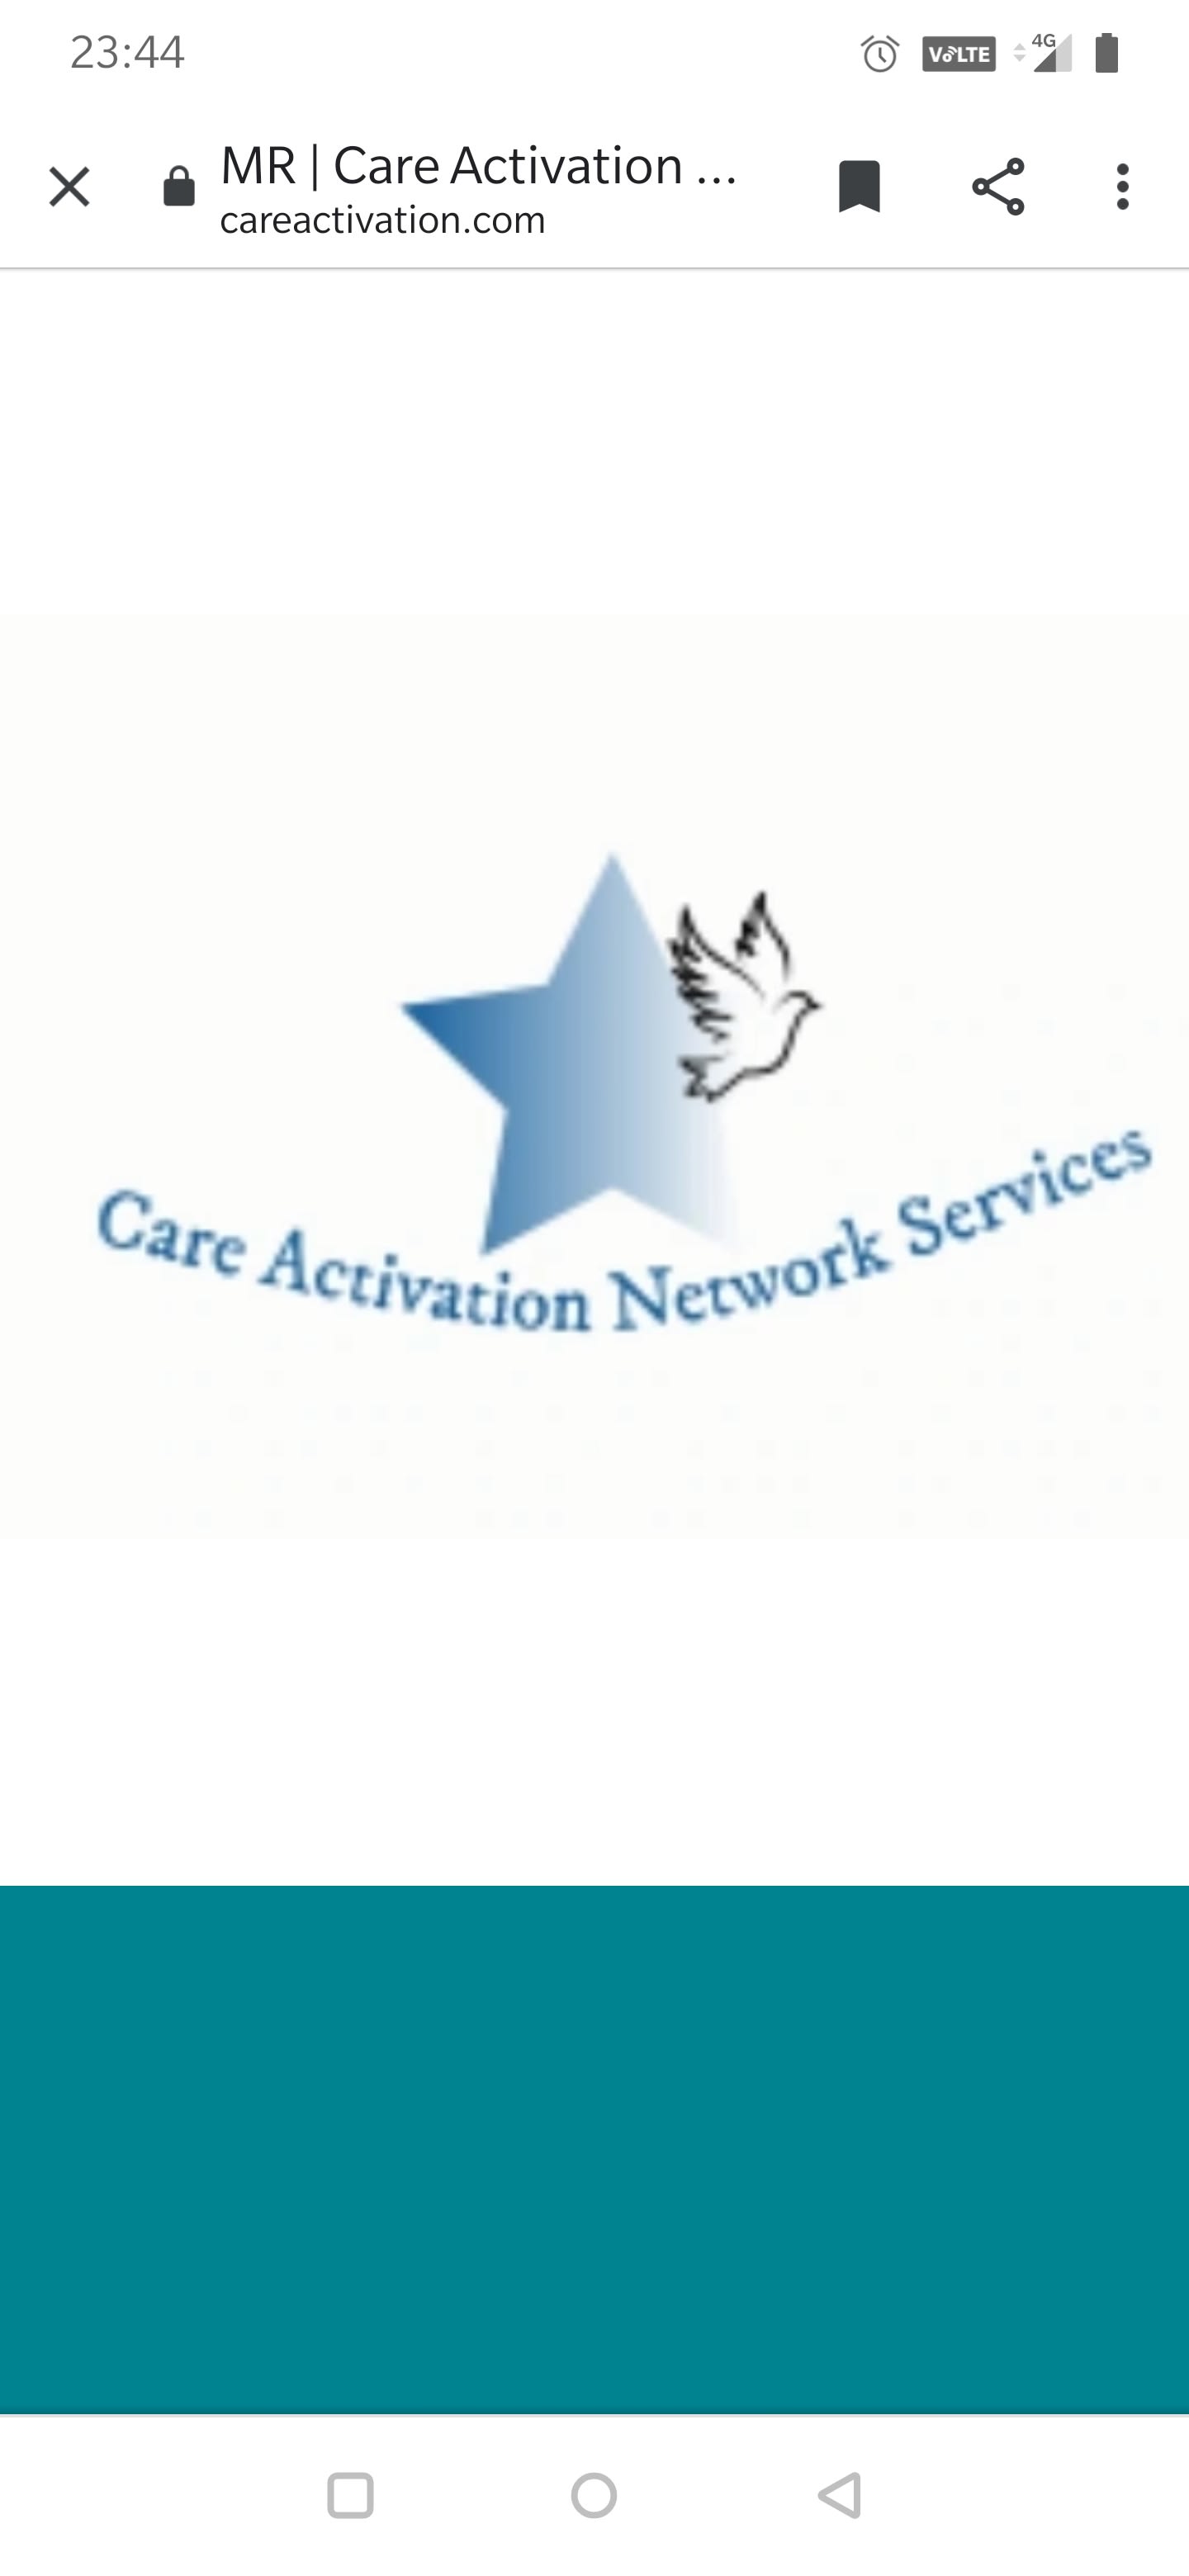 Care Activation Network Services